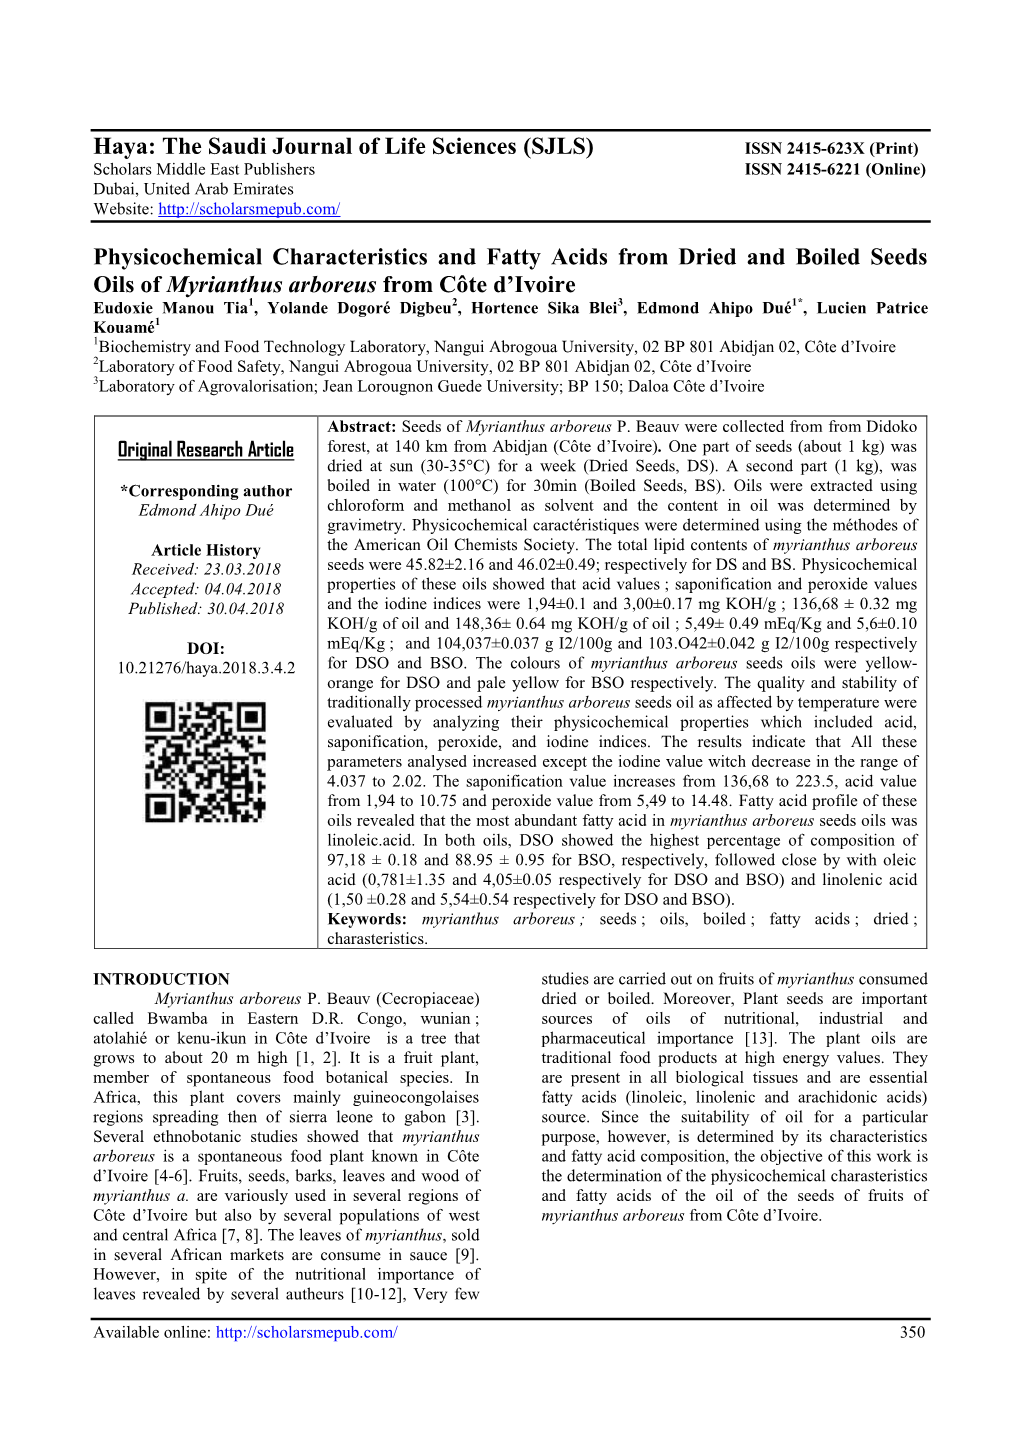 Physicochemical Characteristics and Fatty Acids from Dried and Boiled